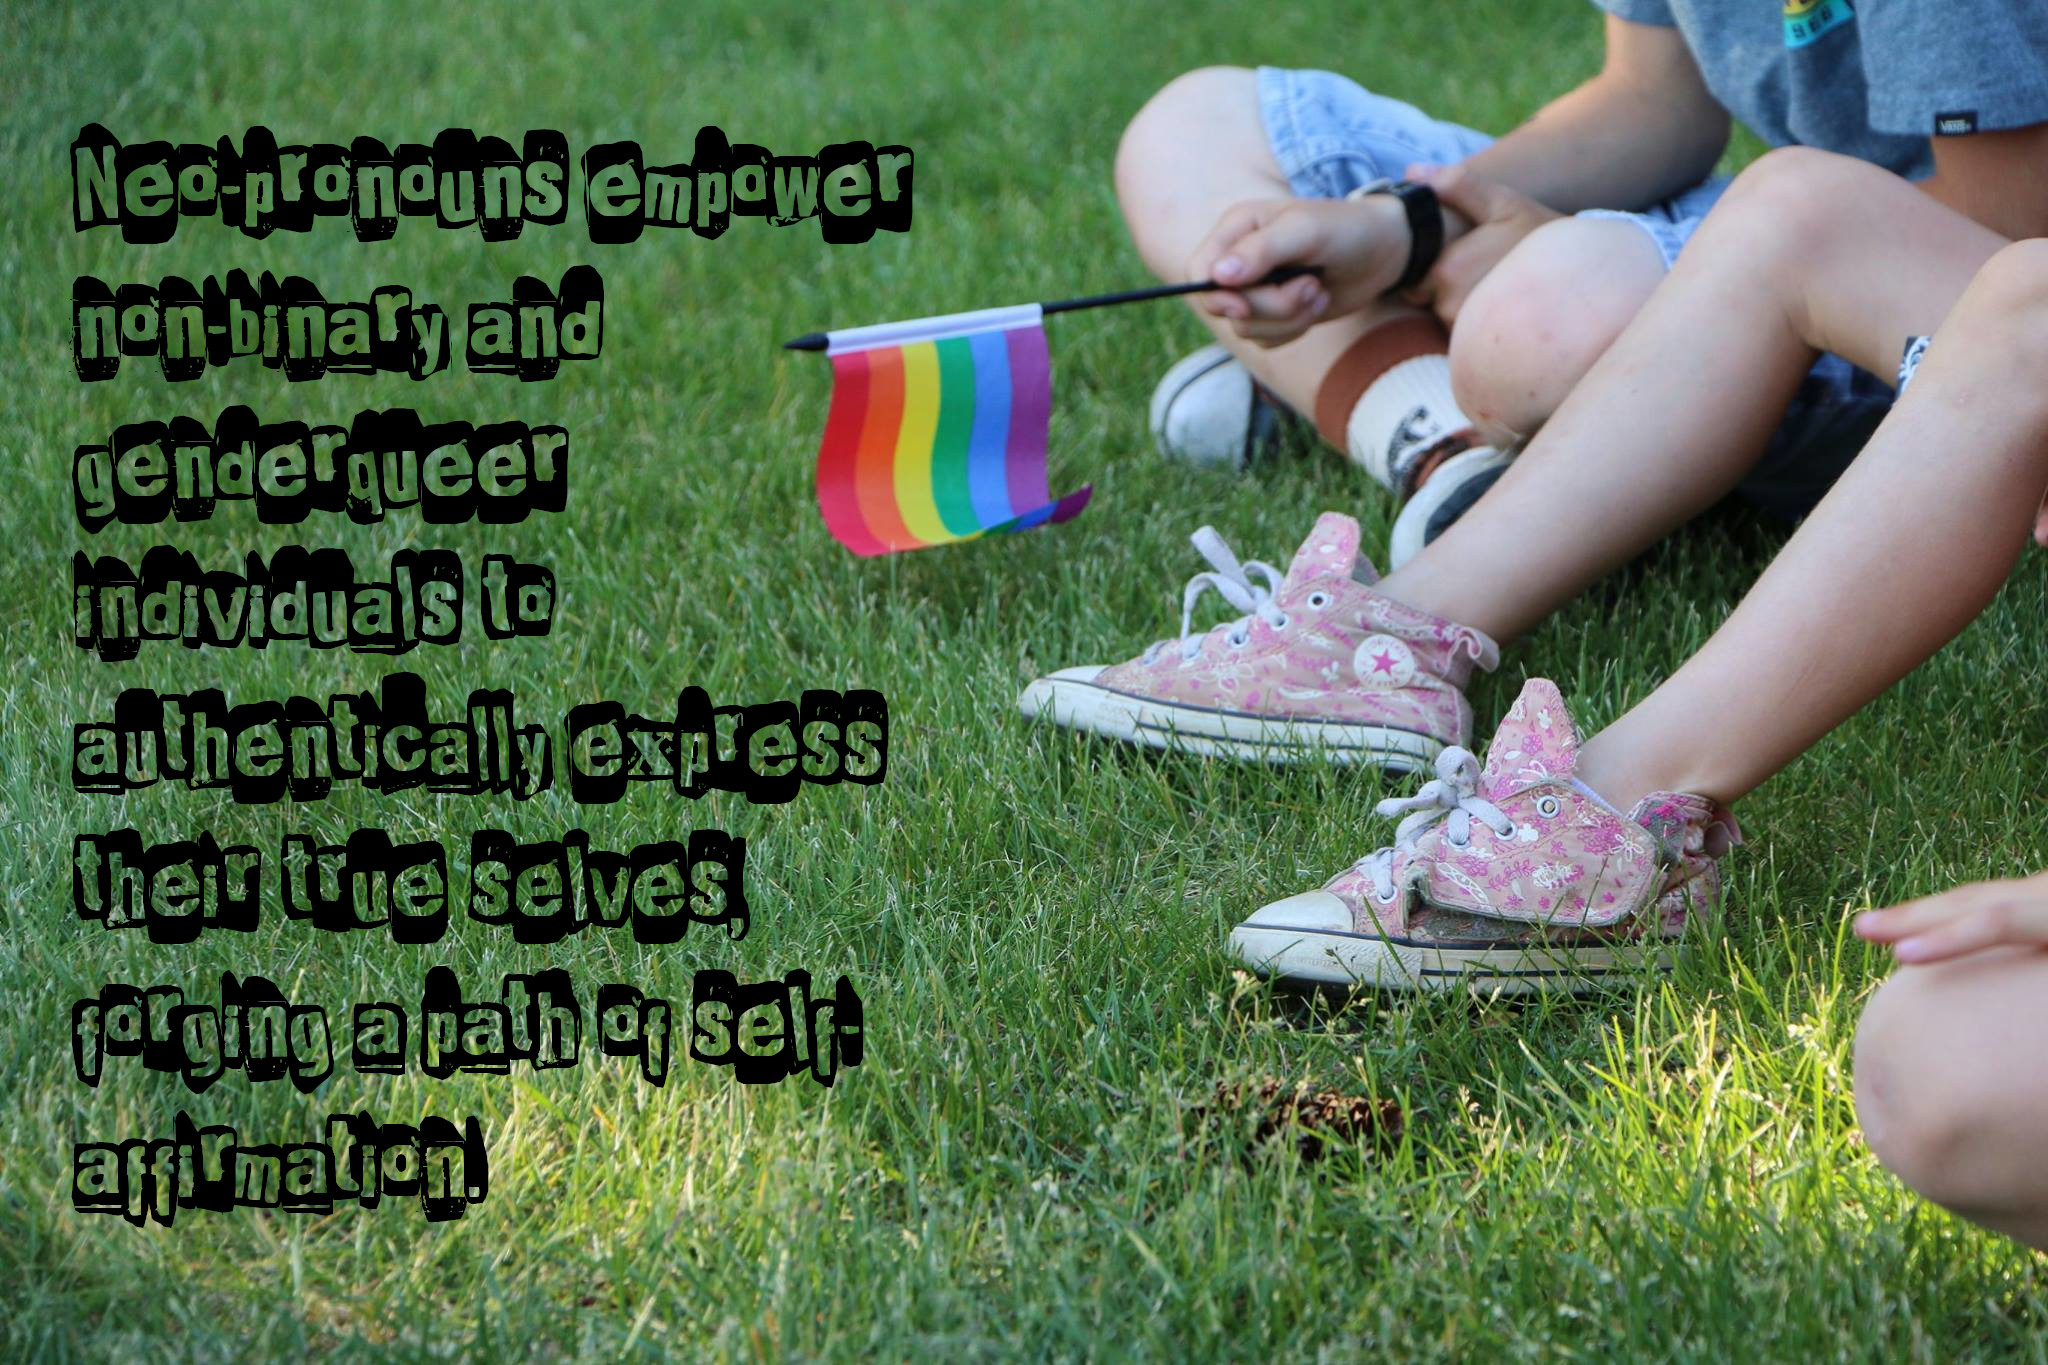 A picture of children's feet on the green grass, and one holds a small pride flag. Over the grass are the words, Neo-pronouns empower non-binary and genderqueer individuals to authentically express their true selves, forging a path of self-affirmation.